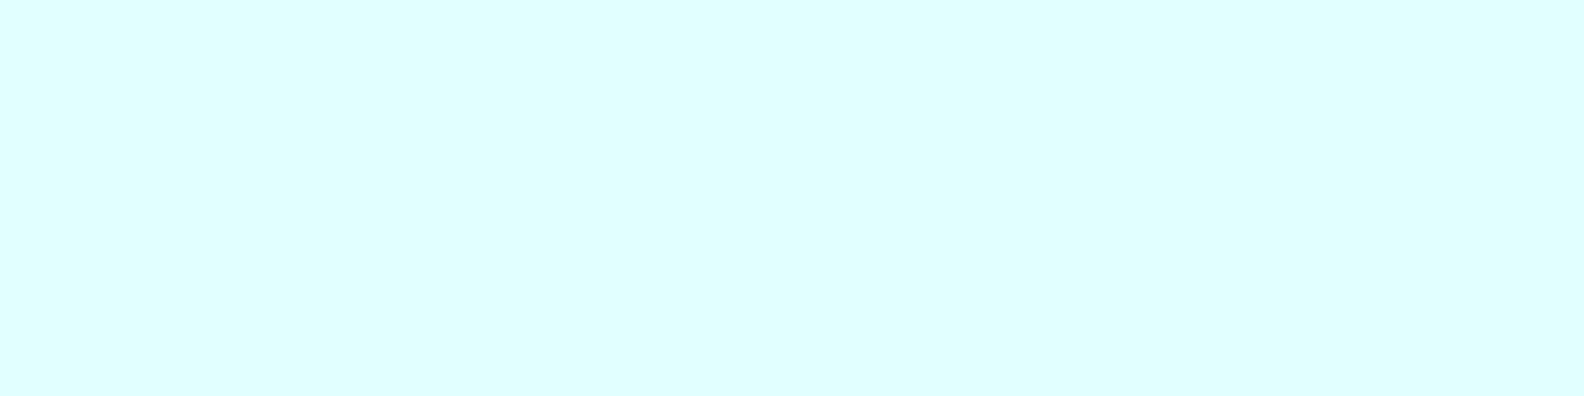 1584x396 Light Cyan Solid Color Background